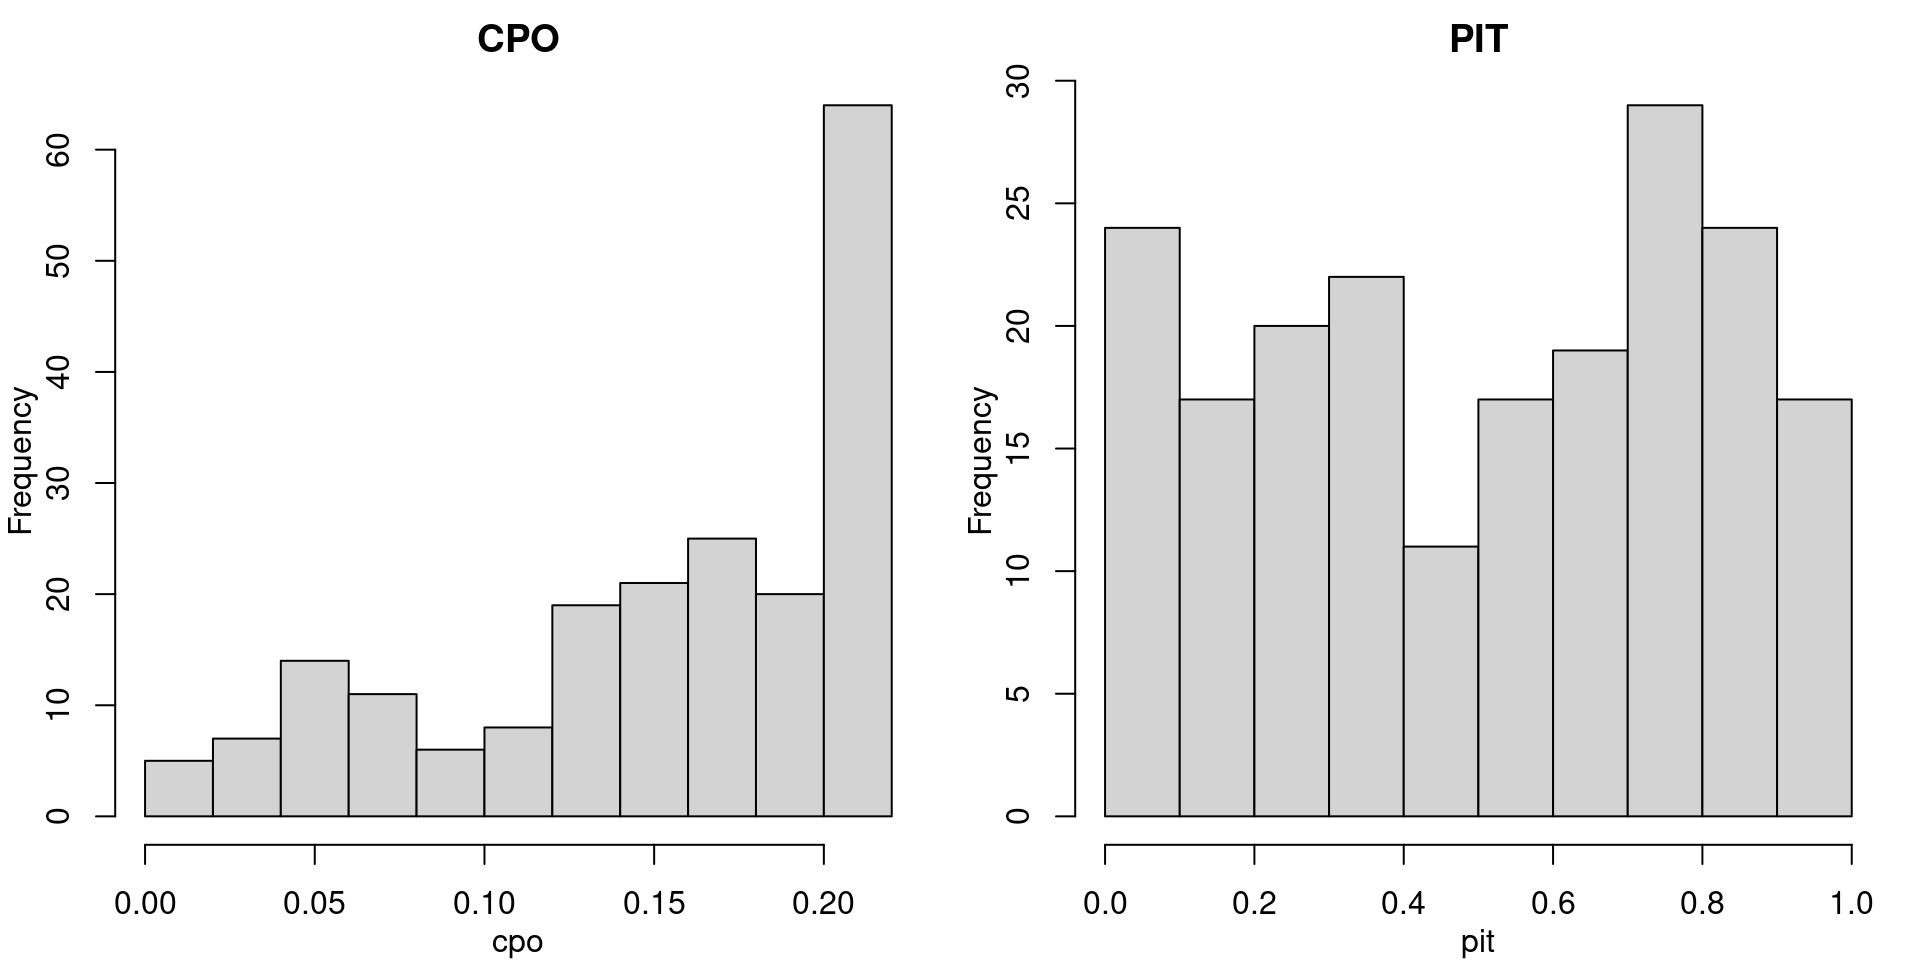 Histograms of CPO and PIT values for the model with fixed effects.